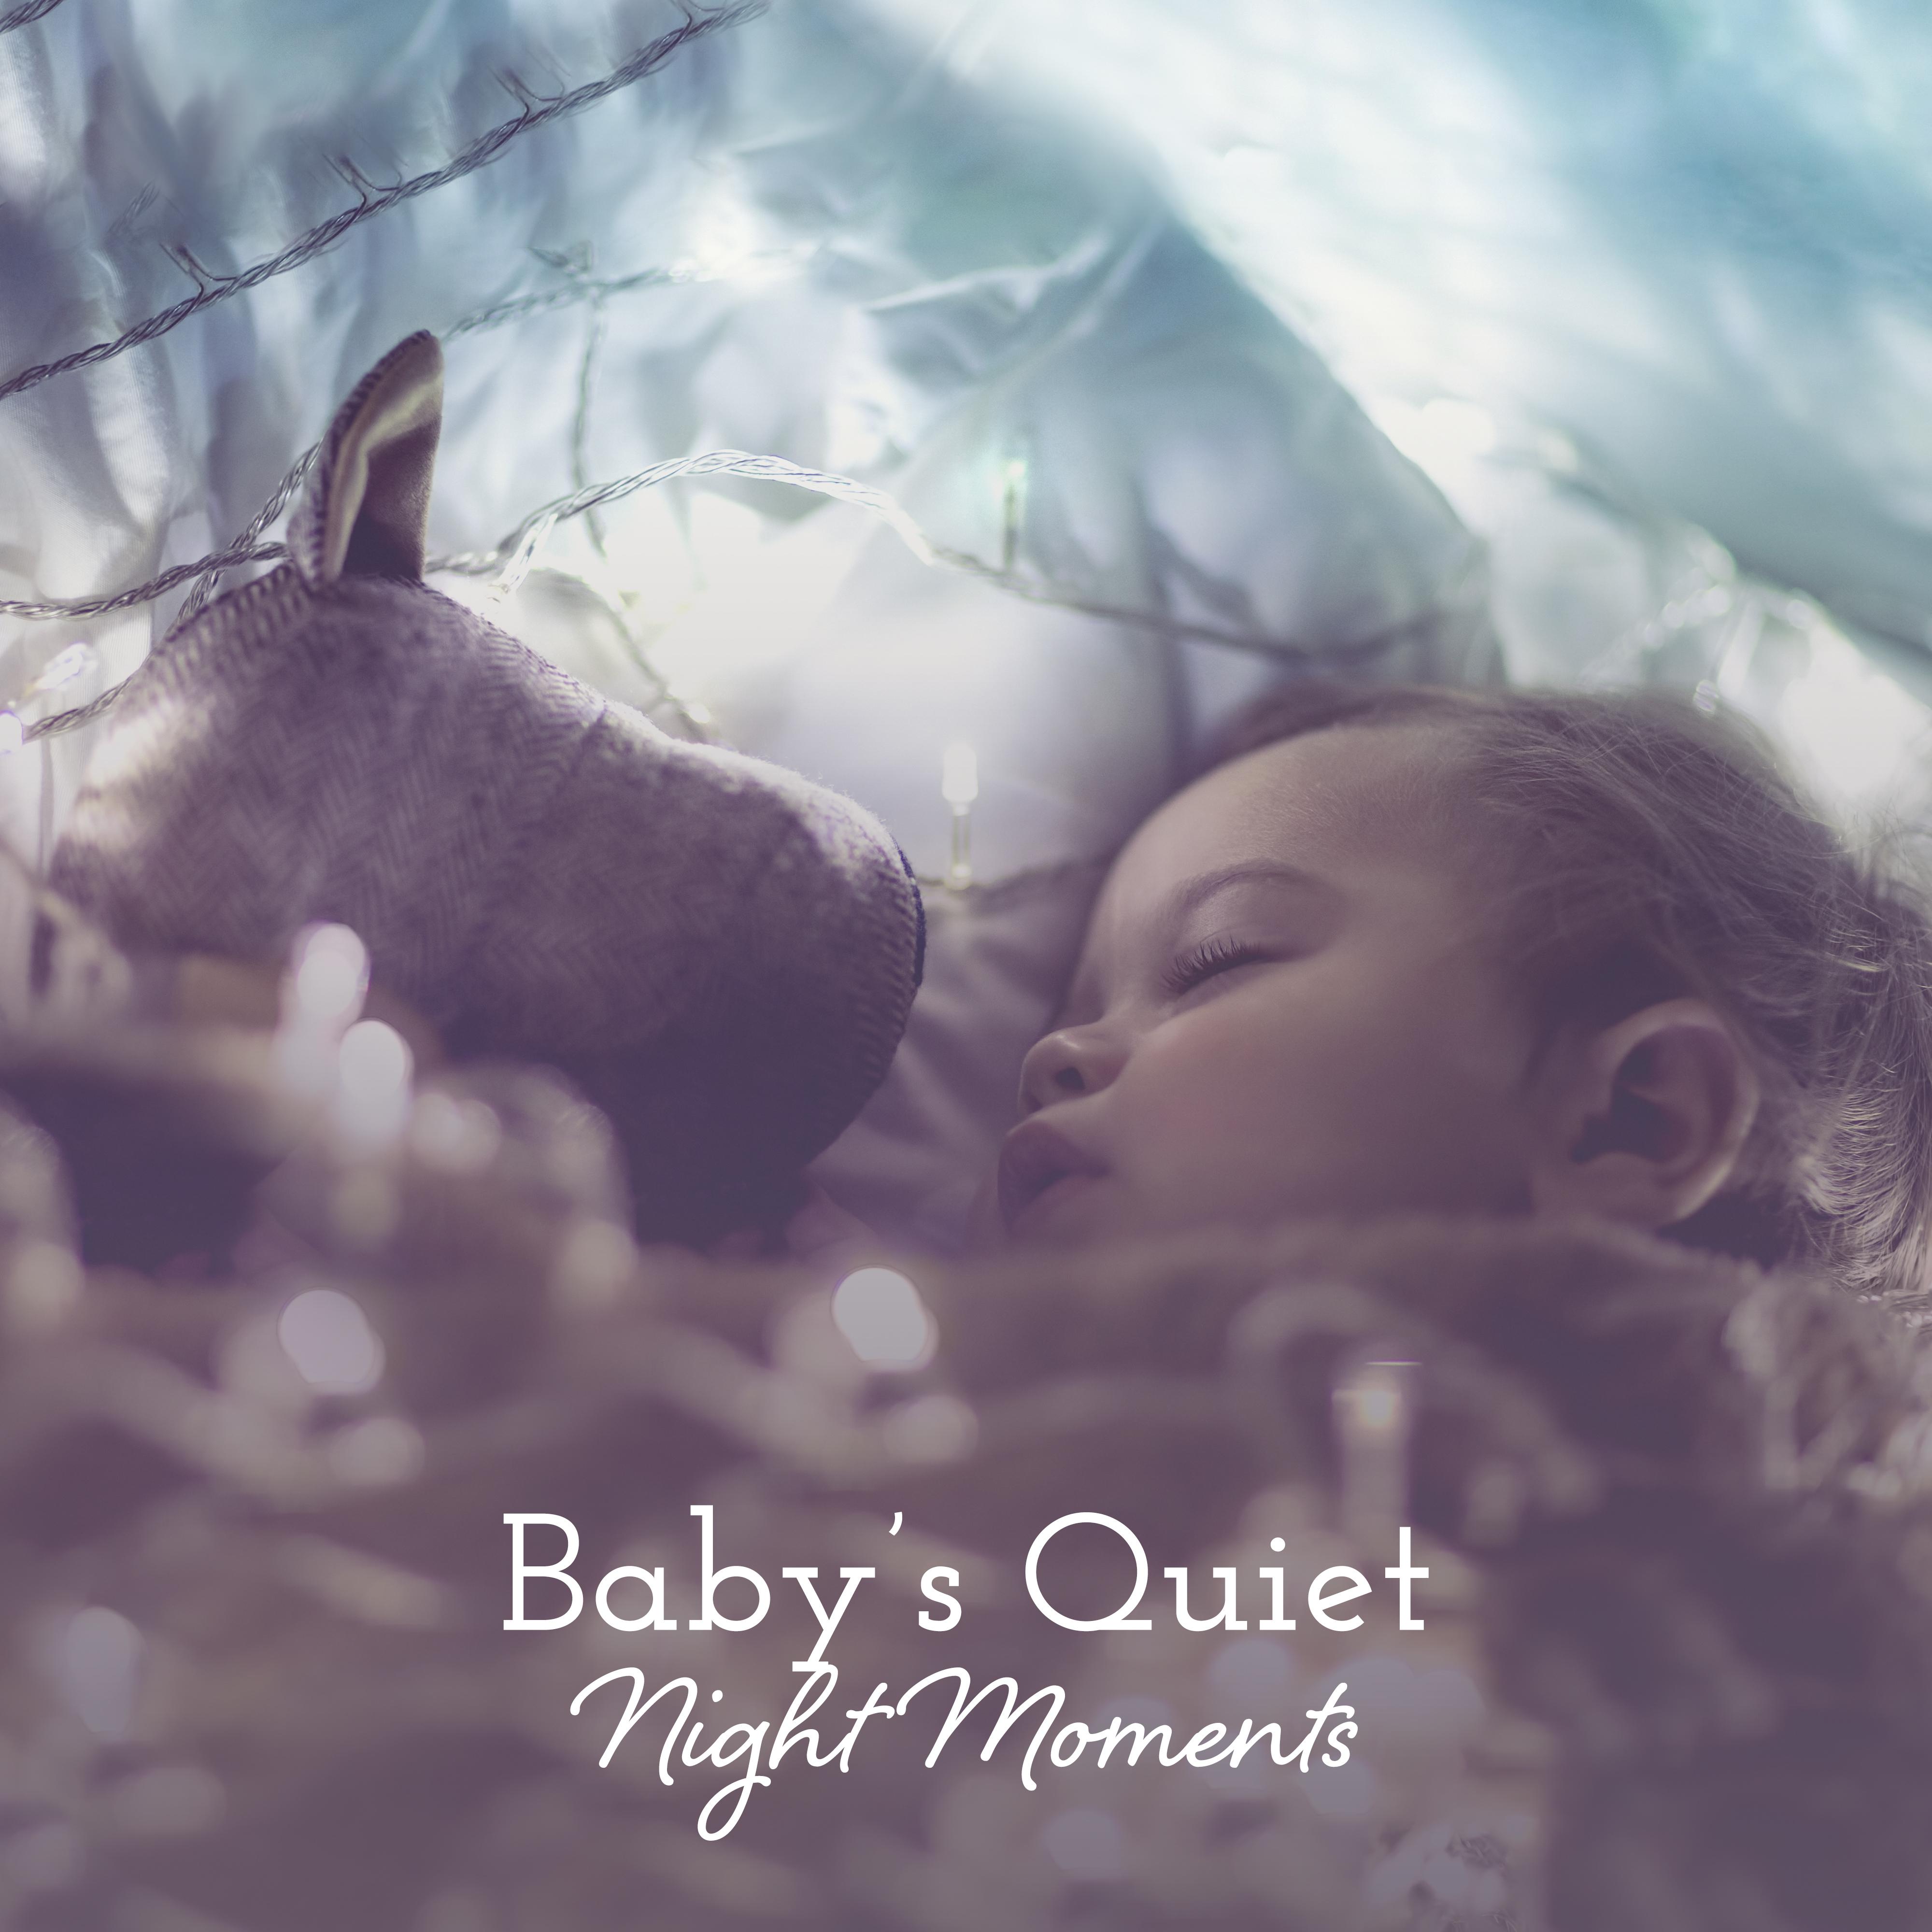 Baby' s Quiet Night Moments: 2019 New Age Soothing Music Selection for Baby  Parents, Calming Down, Cure Insomnia, Lullabies for Perfect Sleep All Night Long